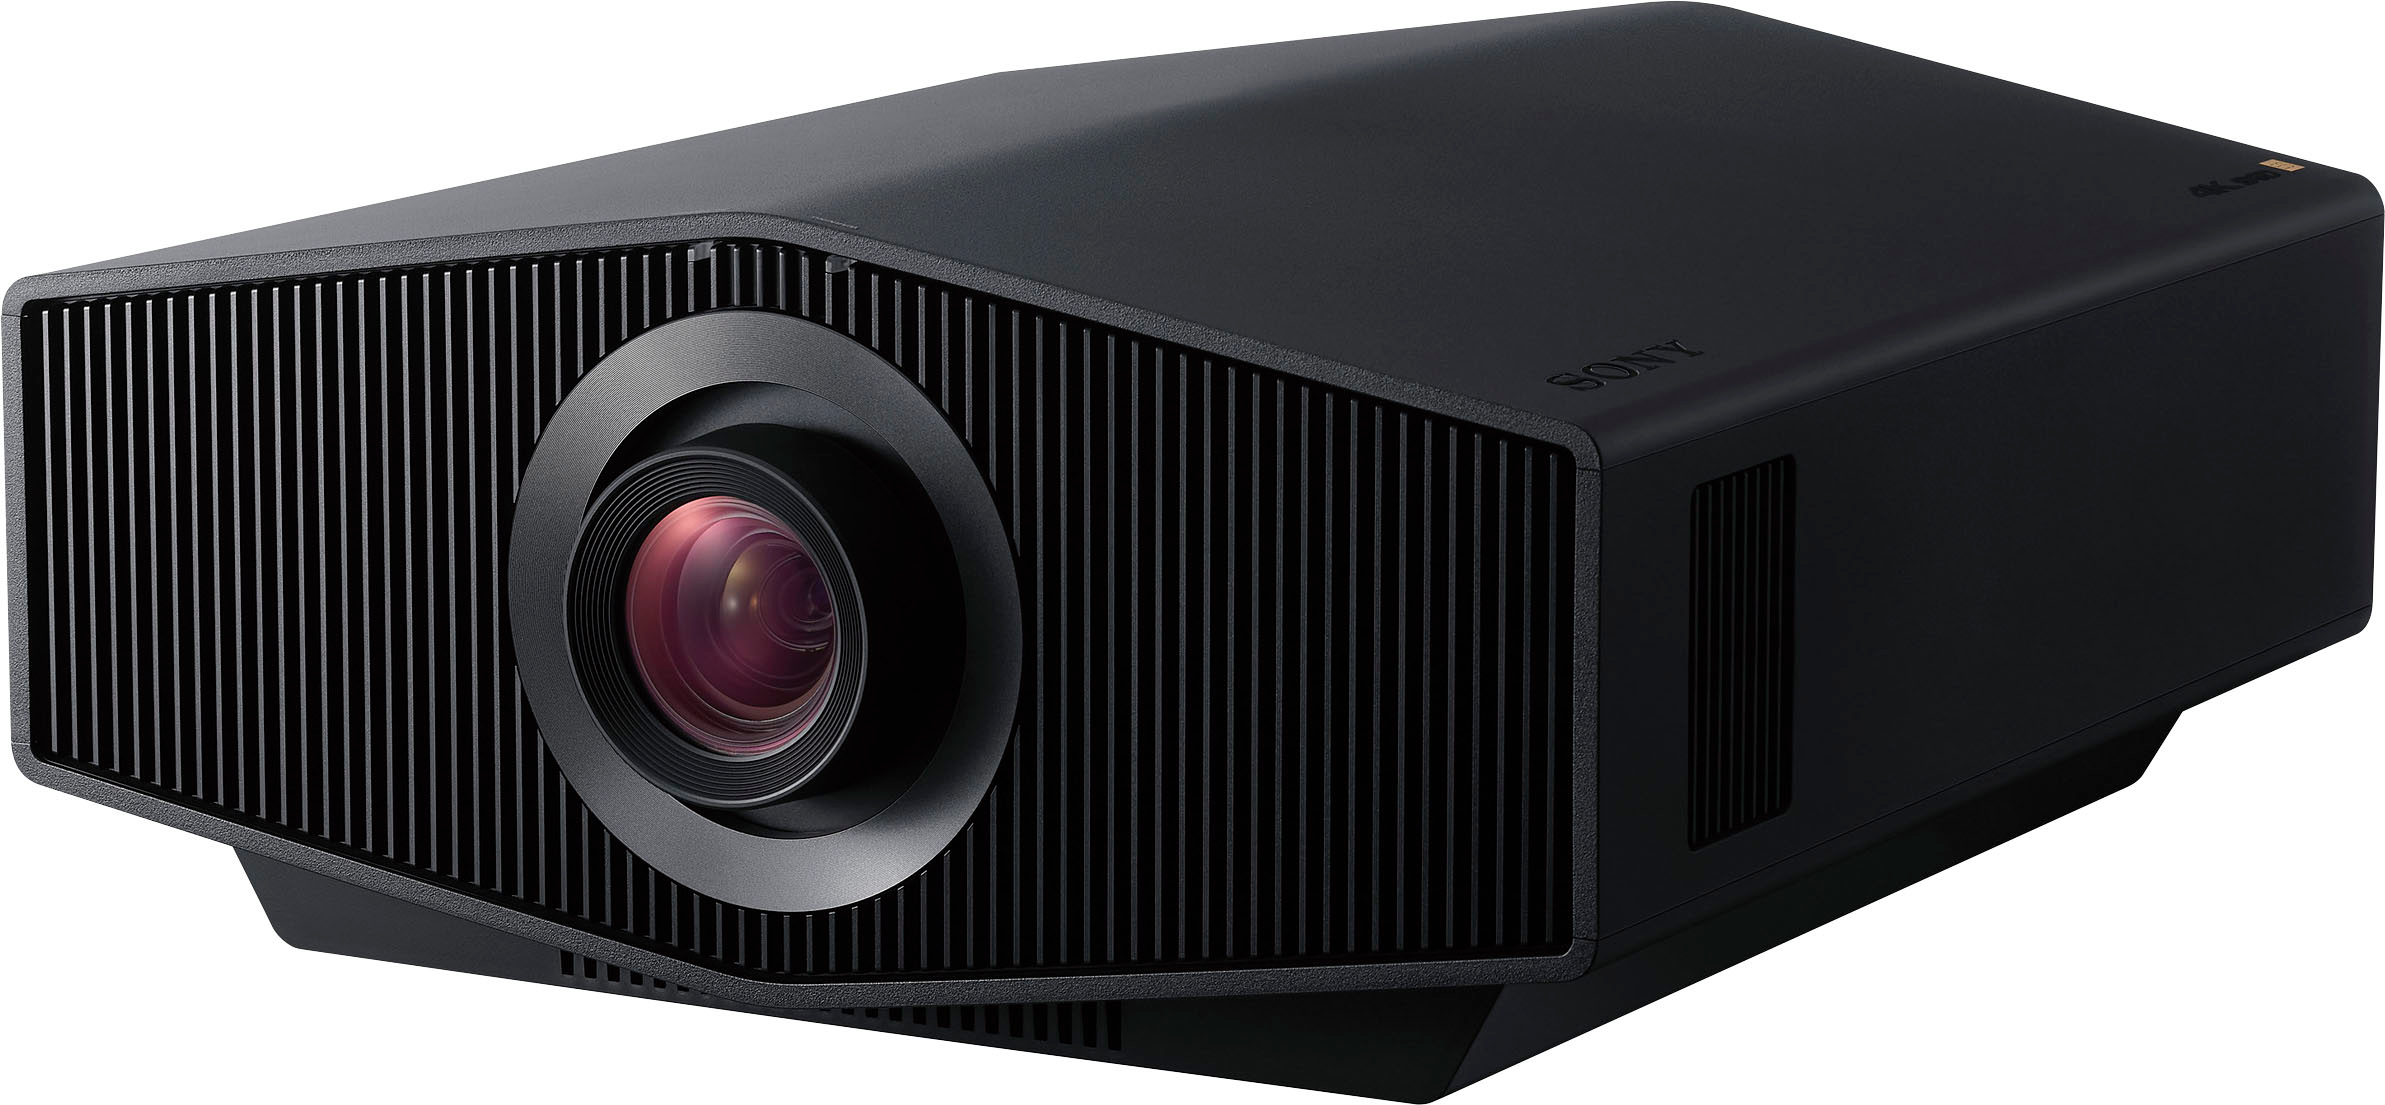 Sony VPLXW7000ES 4K HDR Laser Home Theater Projector with Native 4K SXRD  Panel Black VPLXW7000ES - Best Buy